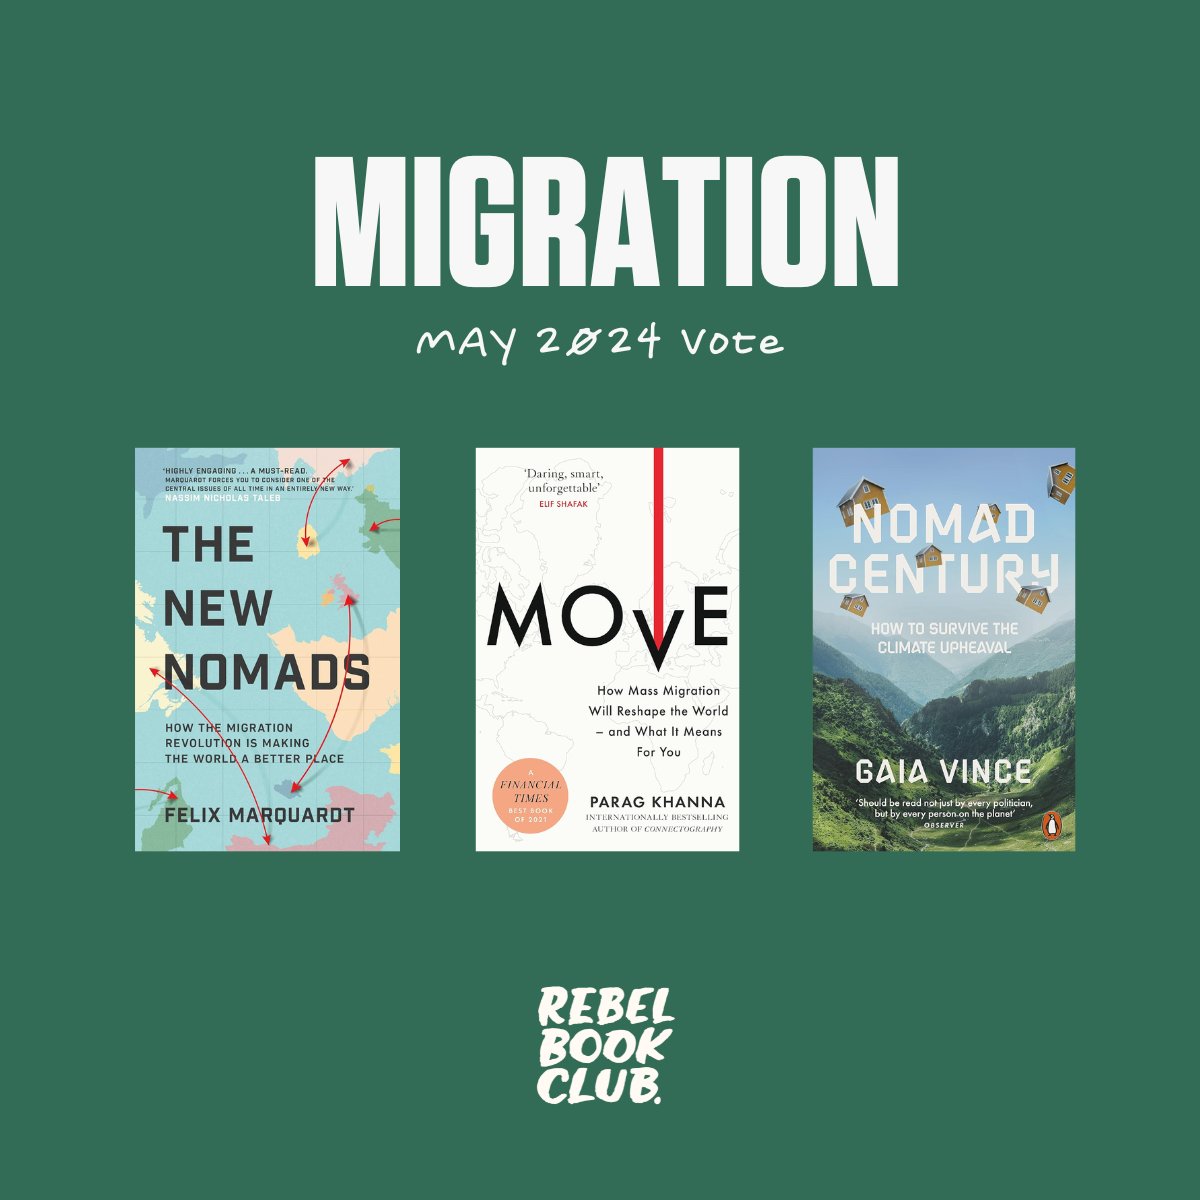 Theme for @rebelbookclub May 2024 is MIGRATION. We're focusing on the book's that look forward as well as back, and how migration might be part of the answer to many of our great challenges. @WanderingGaia @paragkhanna @Feleaks